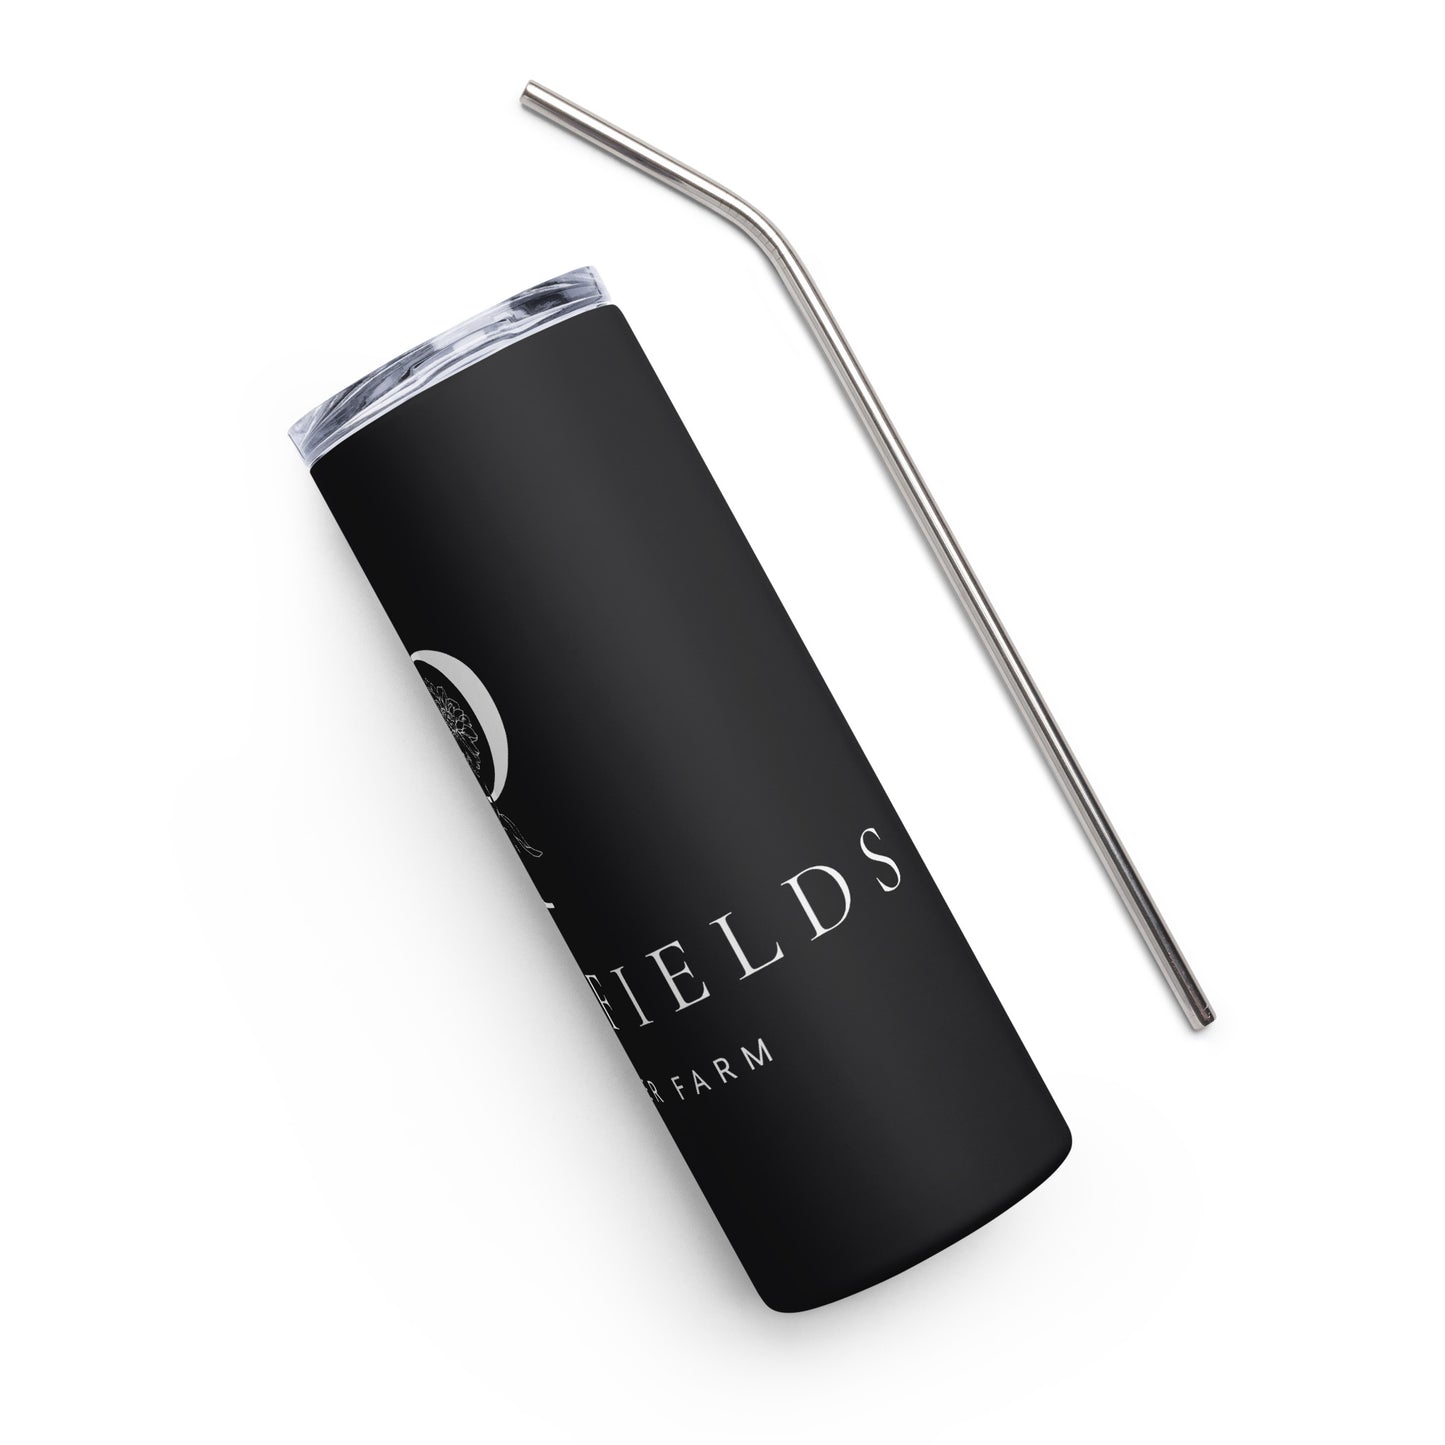 The Posie Fields Stainless steel tumbler